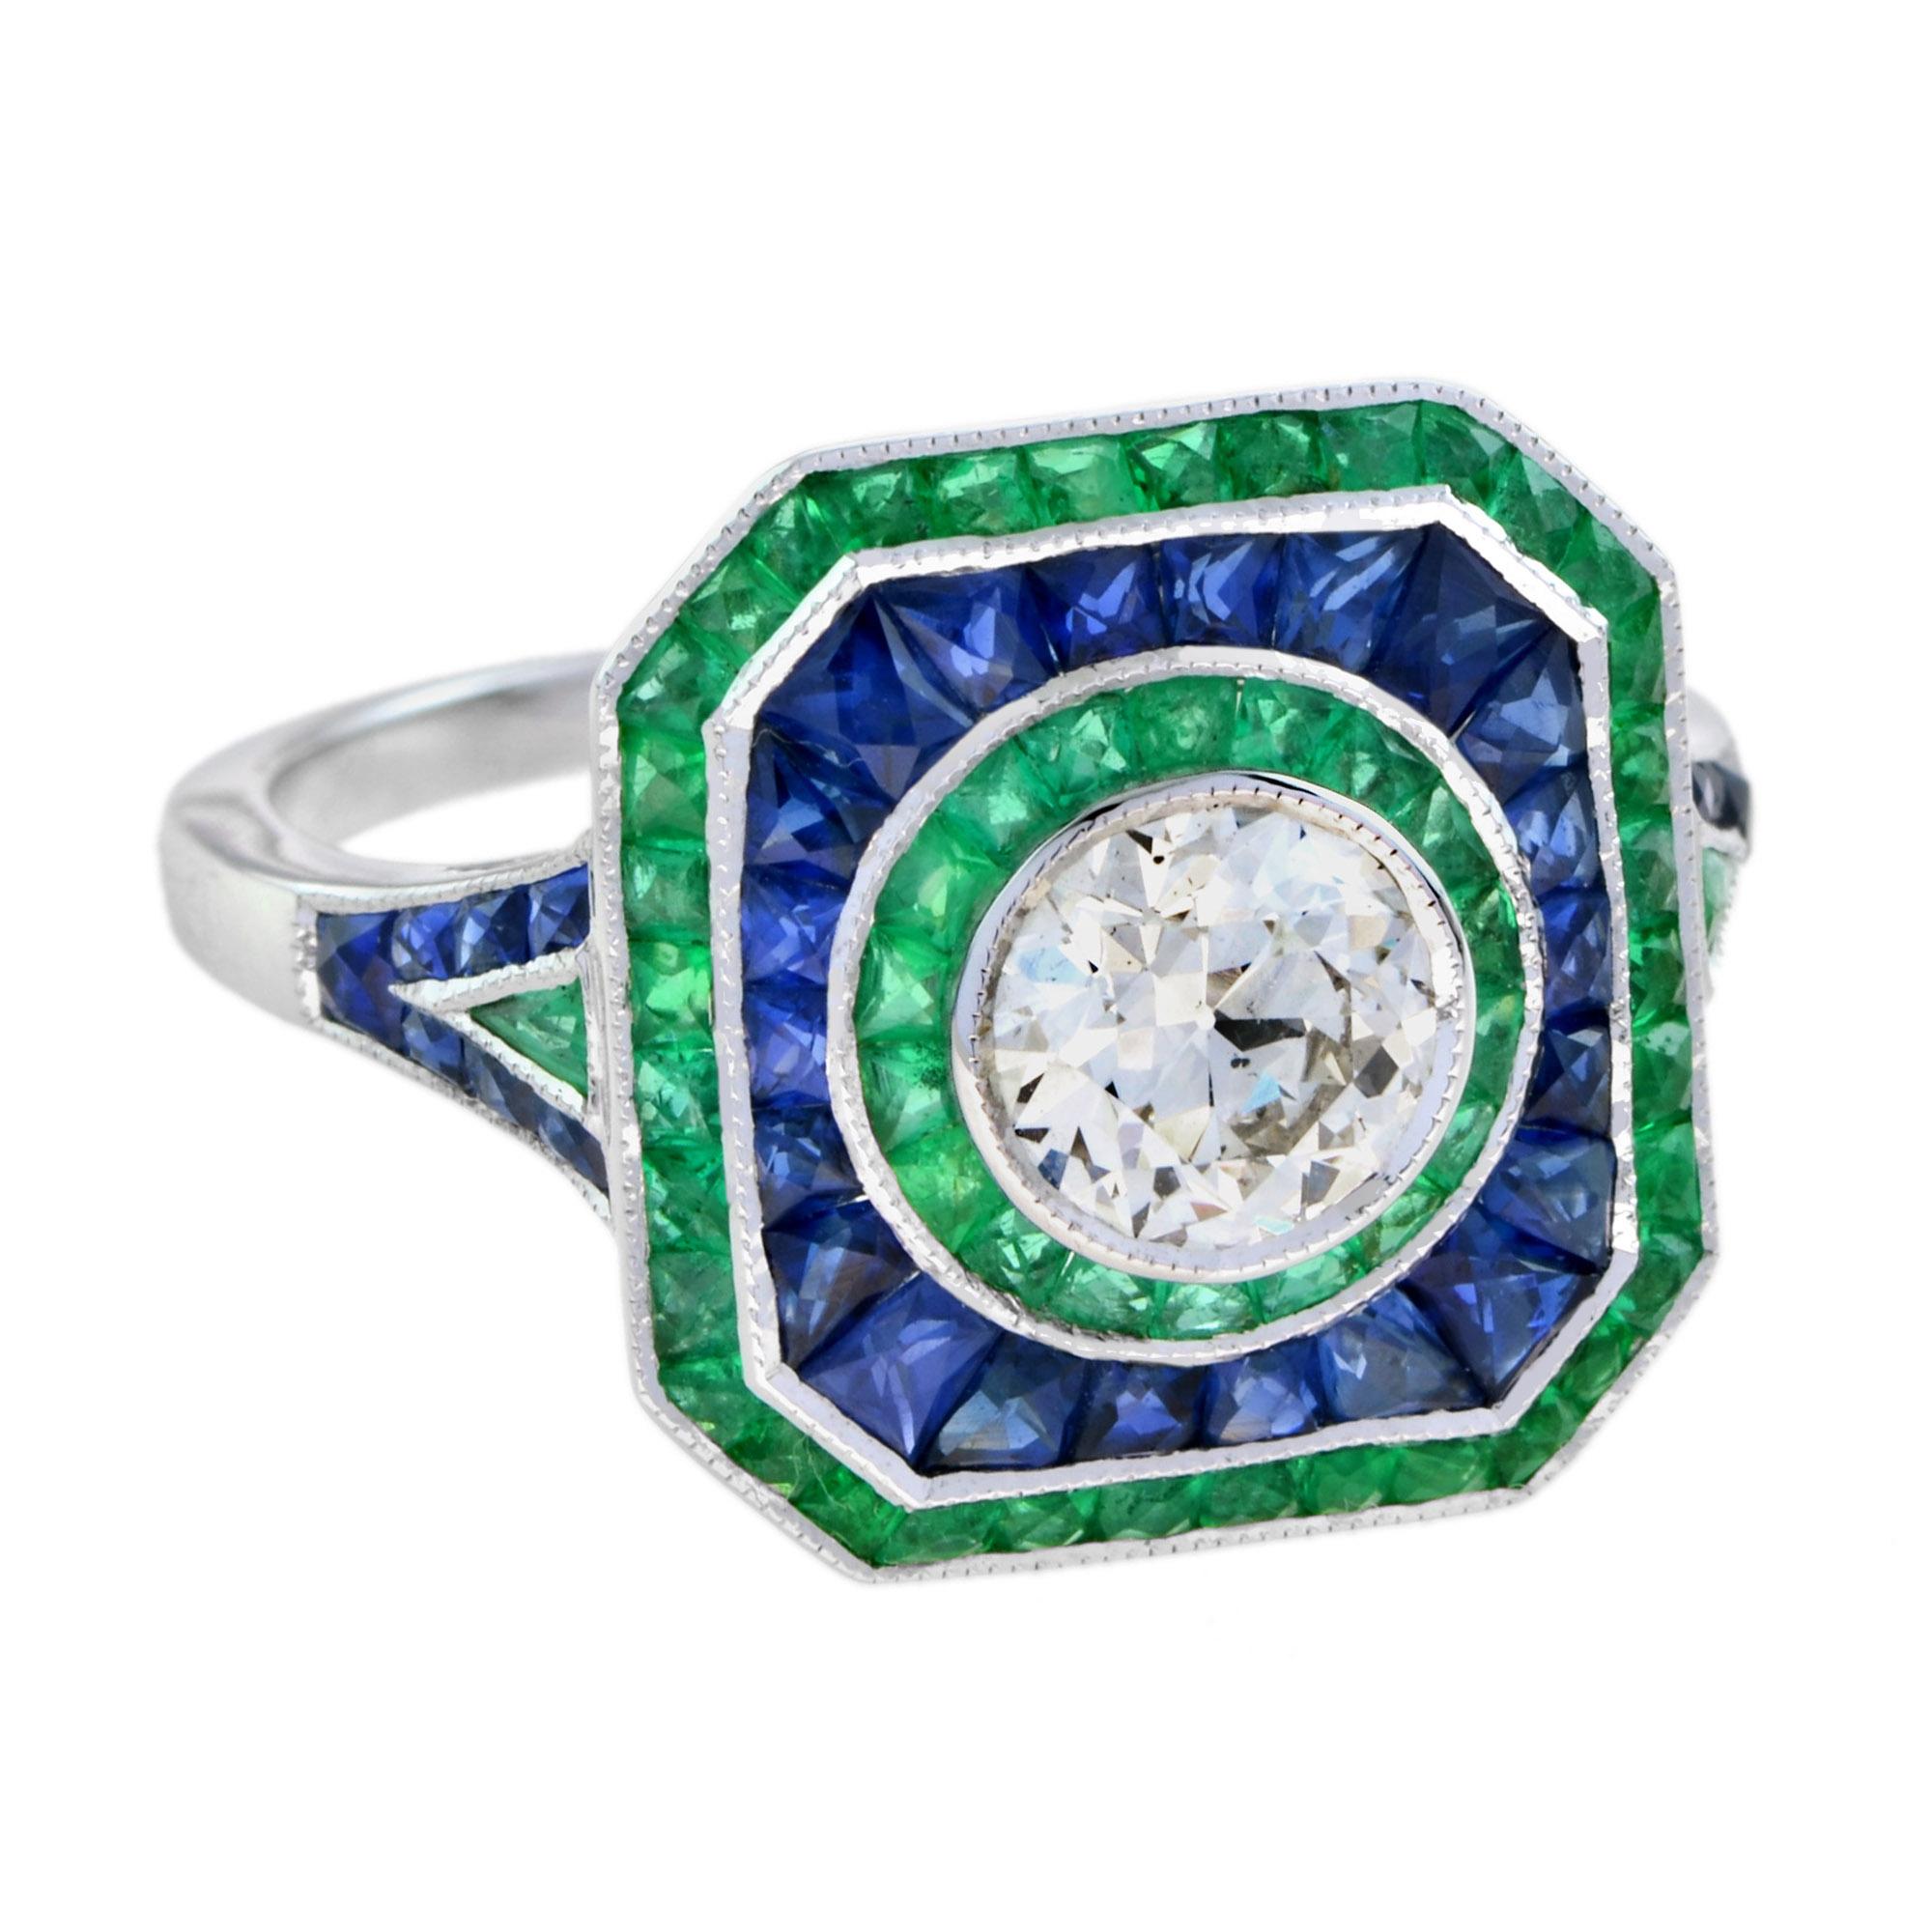 A fantastic tricolor antique style diamond ring. The unusual octagonal outline certainly gives it an Art Deco look. Three rows individually channel set with emeralds an blue sapphires. Finished in the center with beautiful old cut round shape